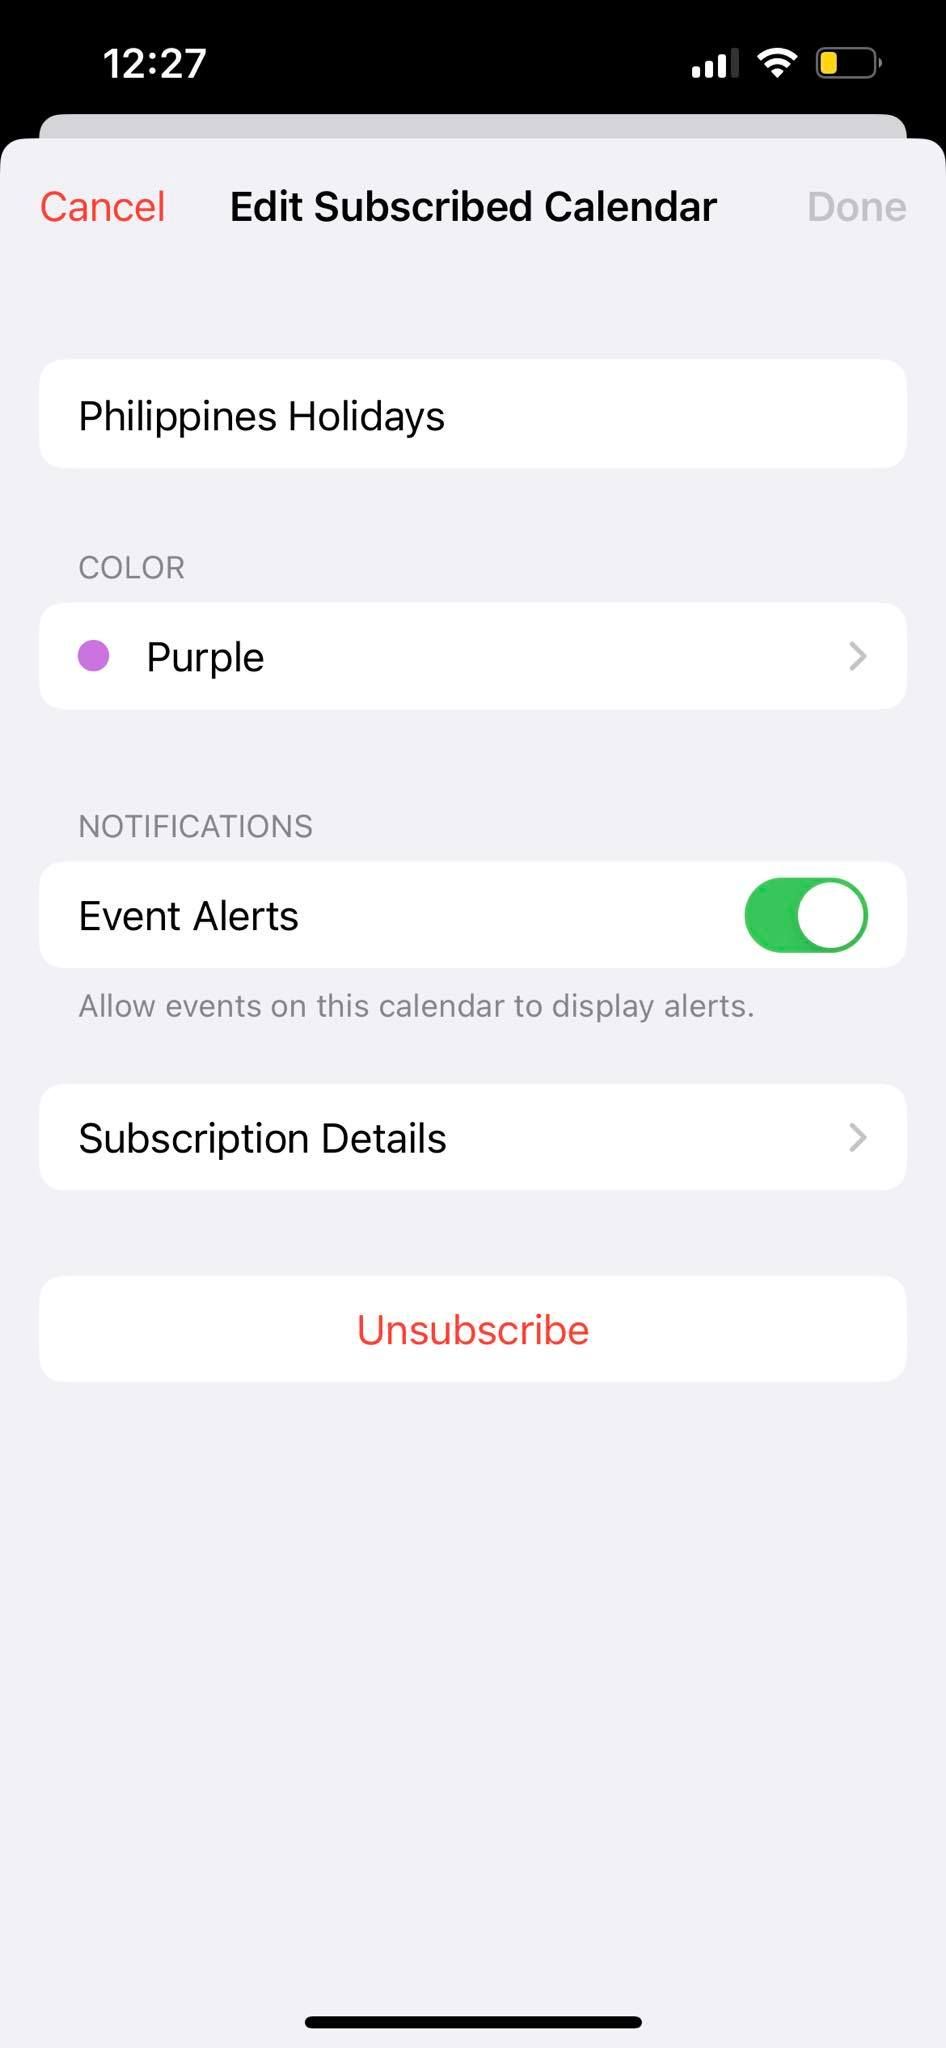 Edit the Calendar Account Subscriptions on iPhone